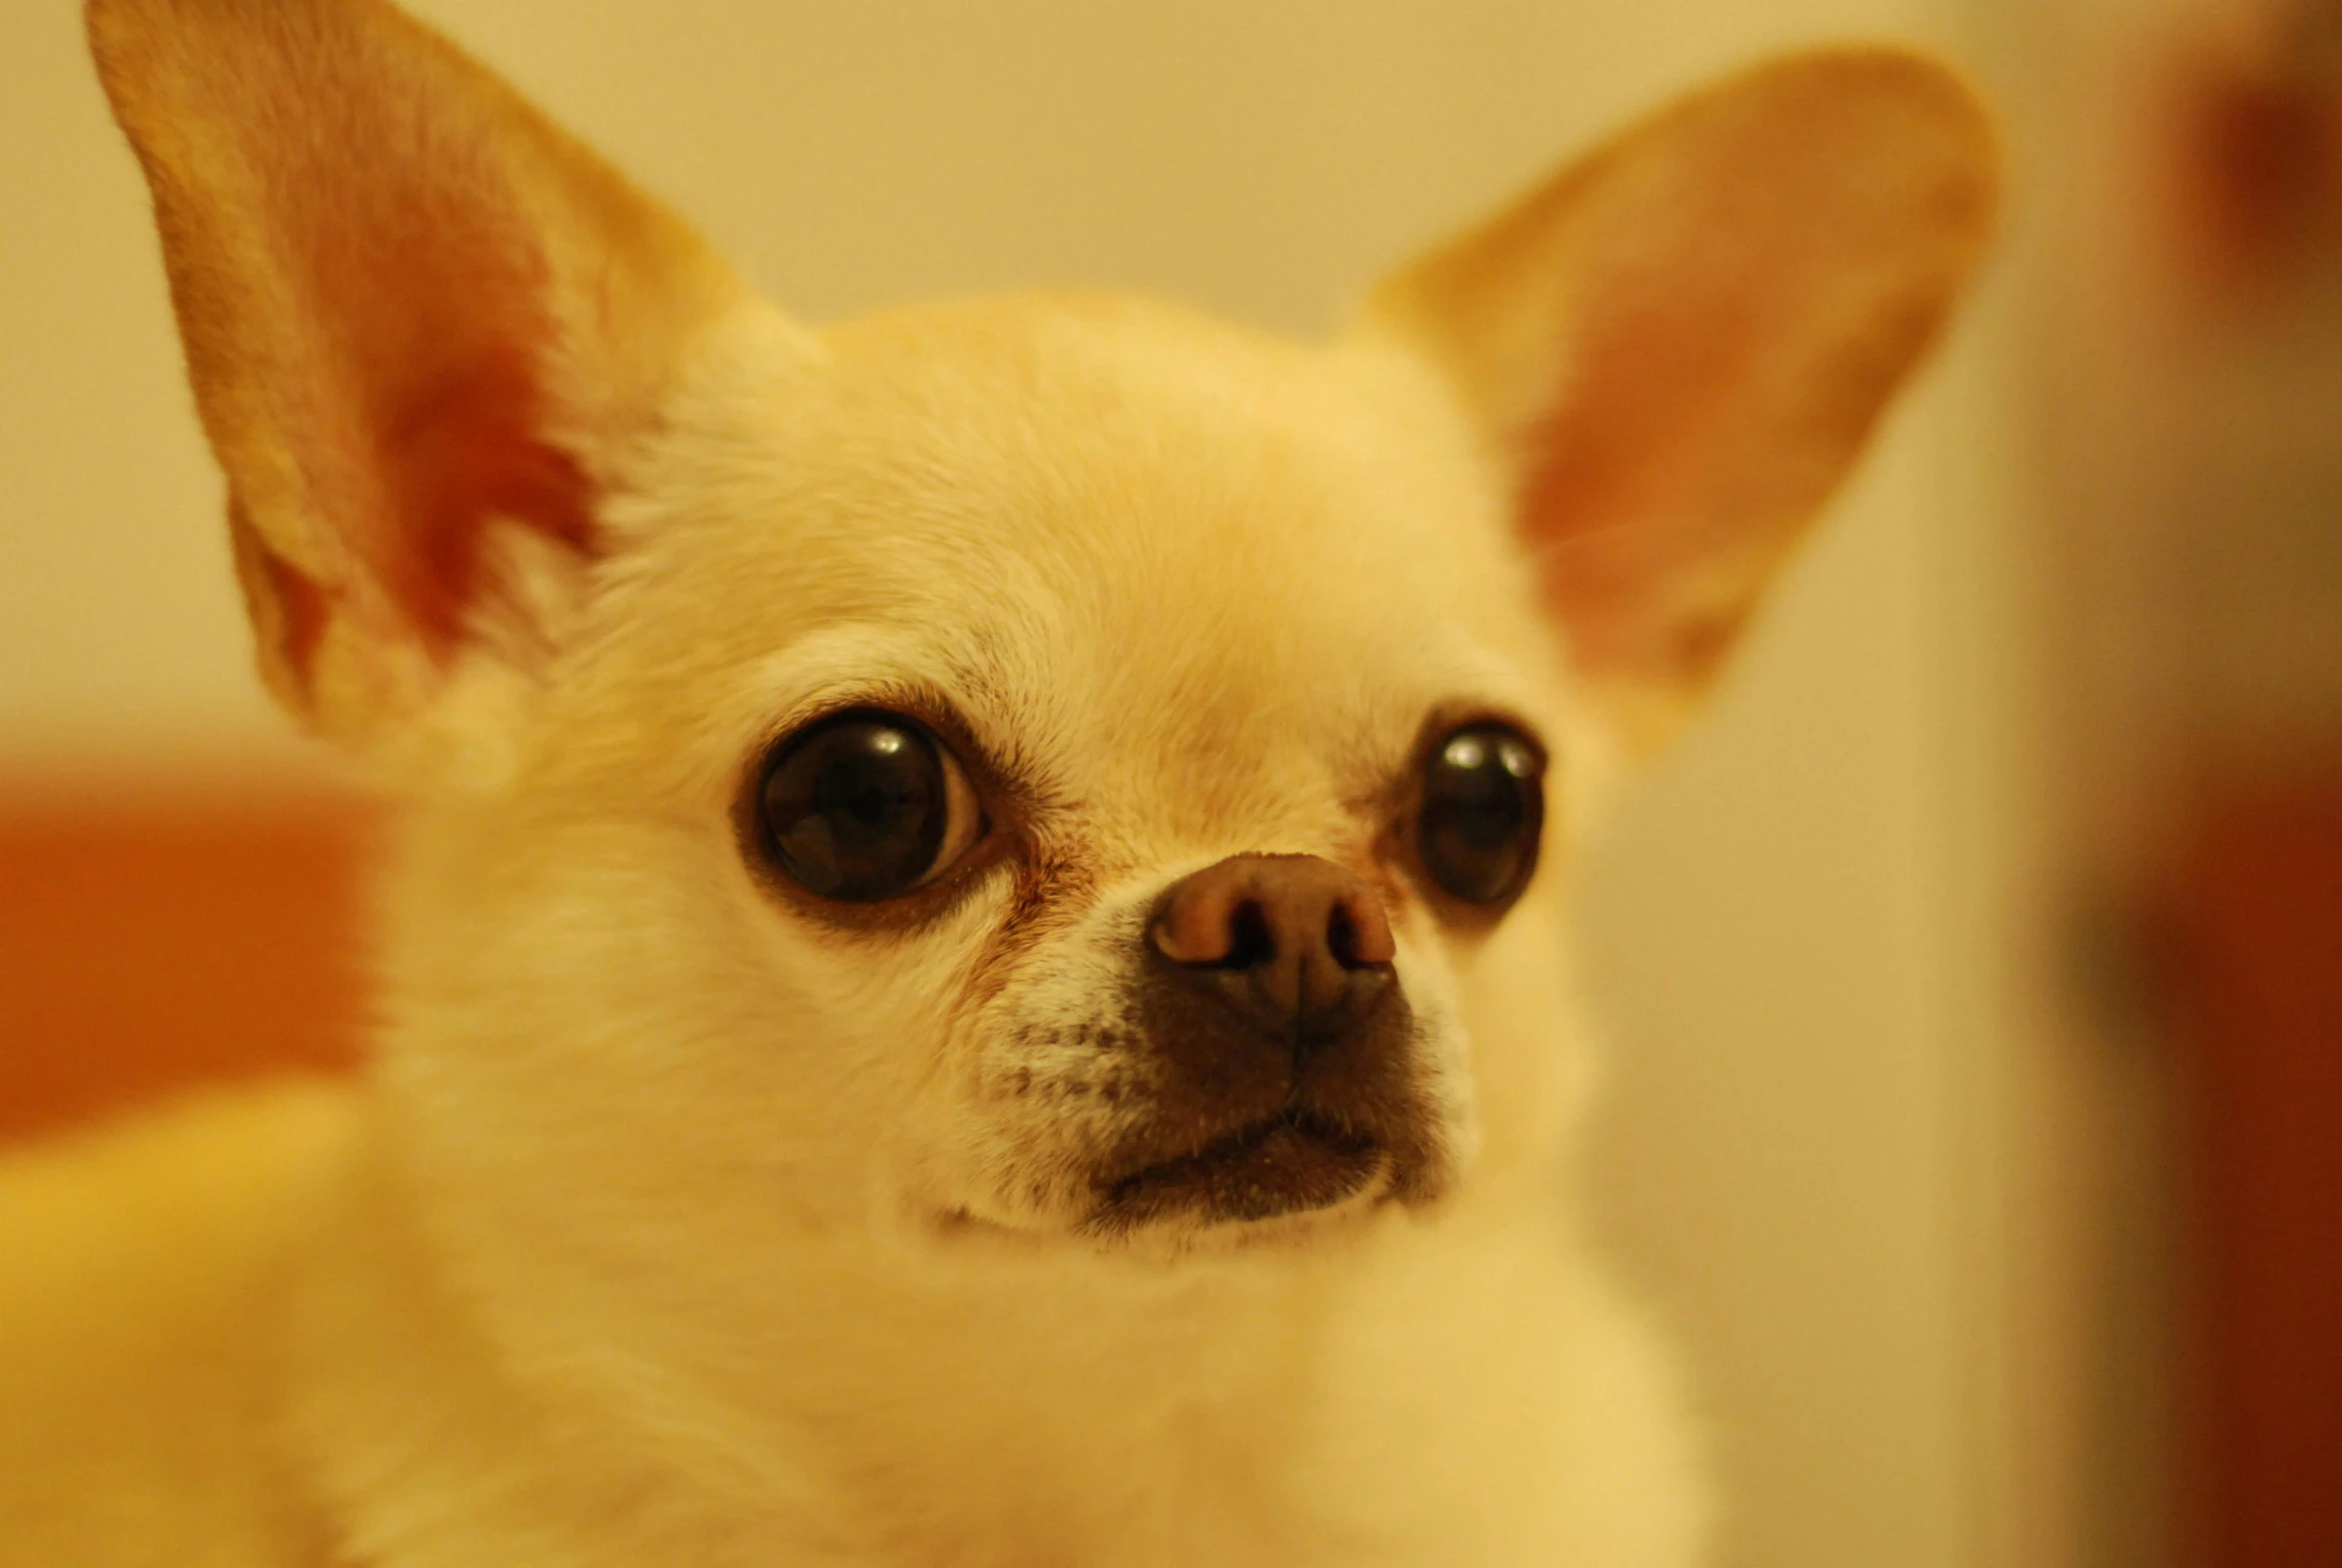 a close up of a small dog on a bed, pexels, god had dog chihuahua's head, square, porcelain skin ”, 2070